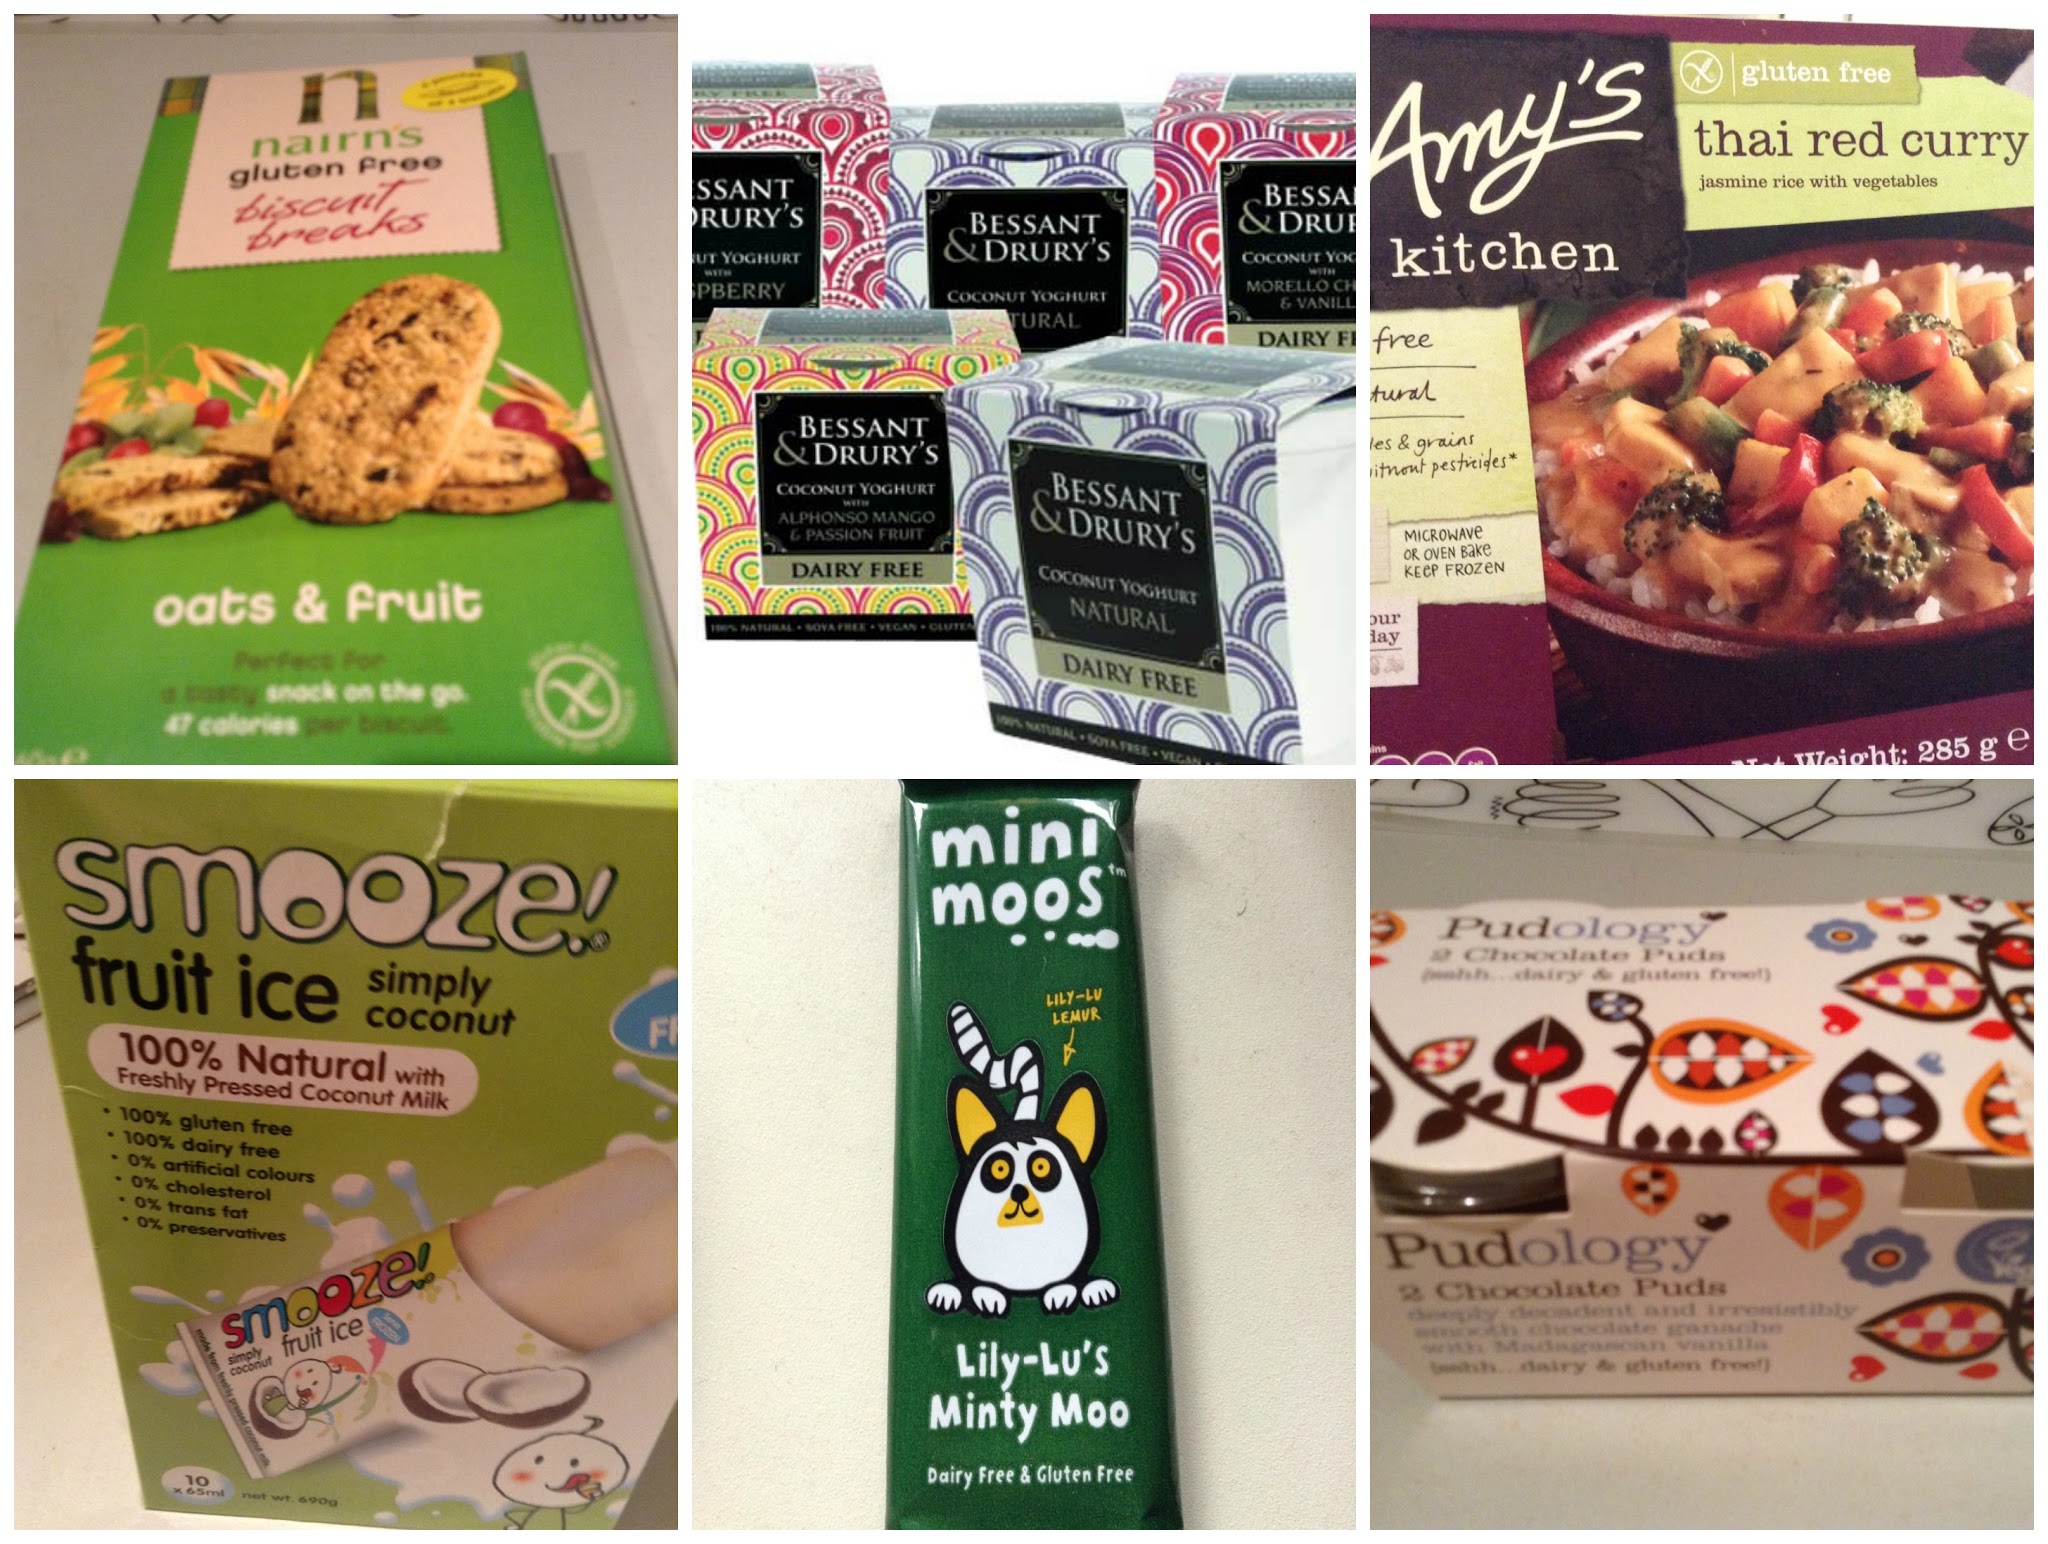 Winners of the 2014 FreeFrom Food Awards